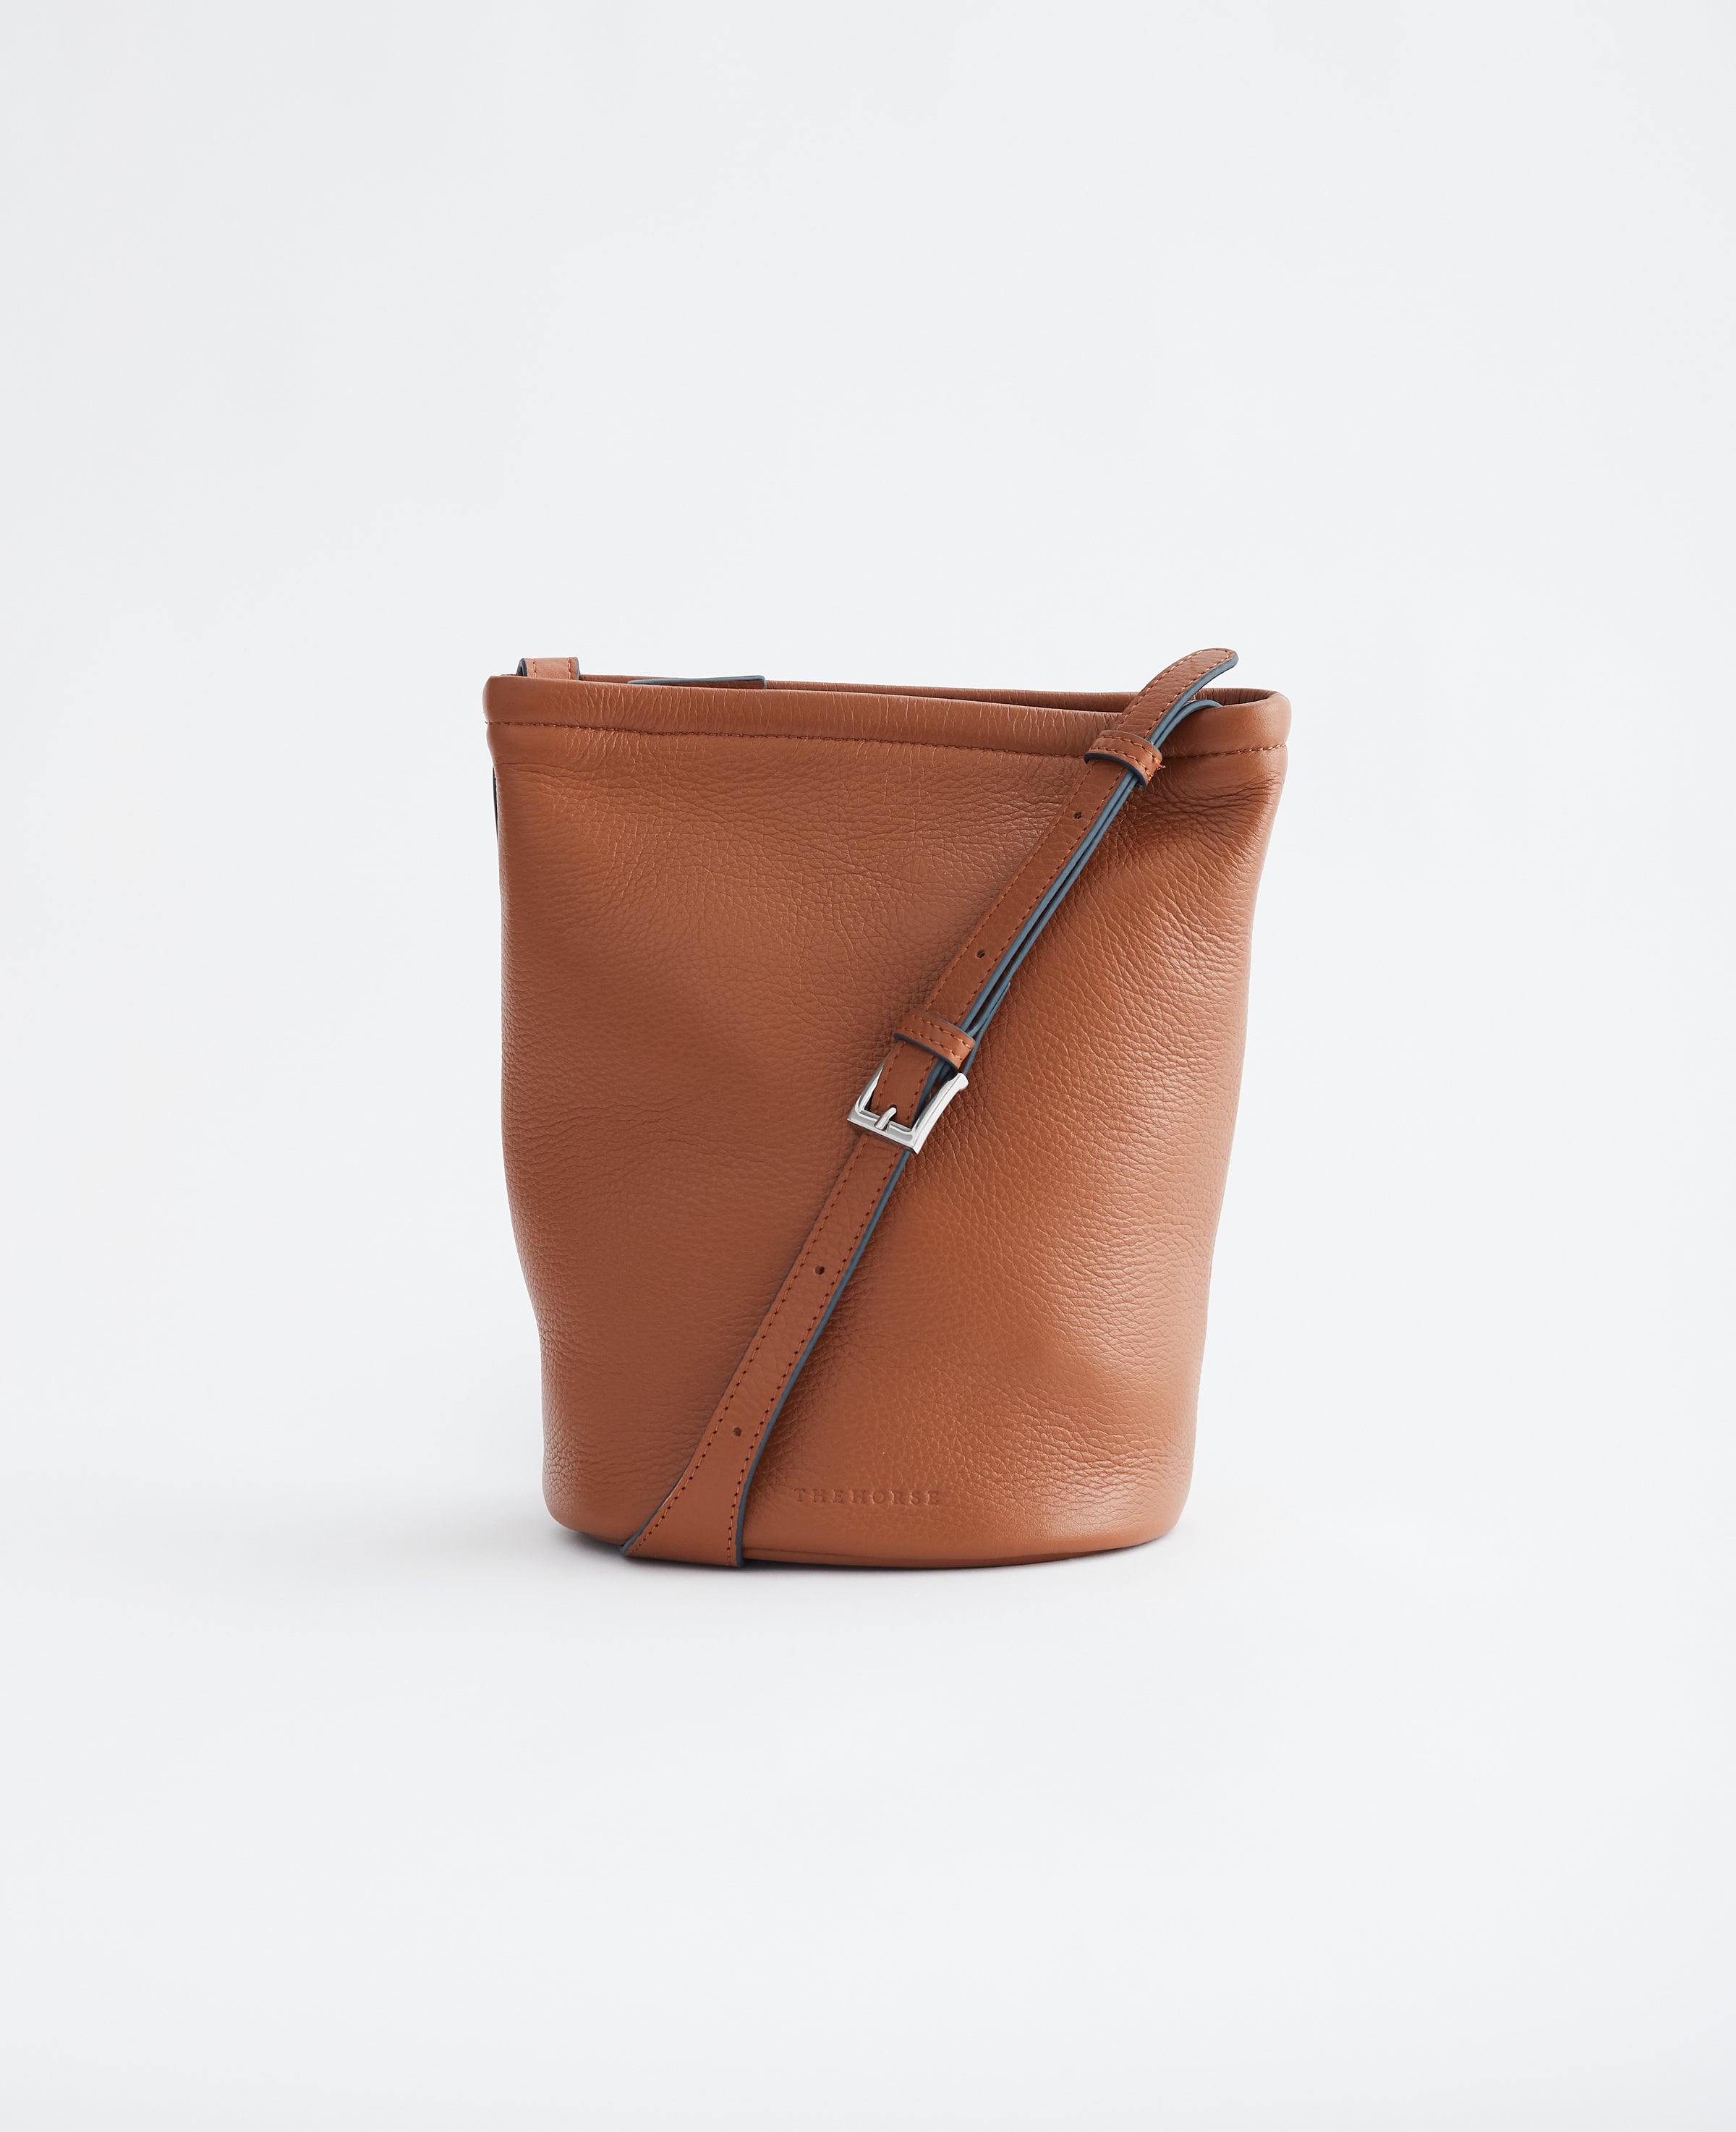 Rosa Leather Zip Bucket Bag in Tan by The Horse®